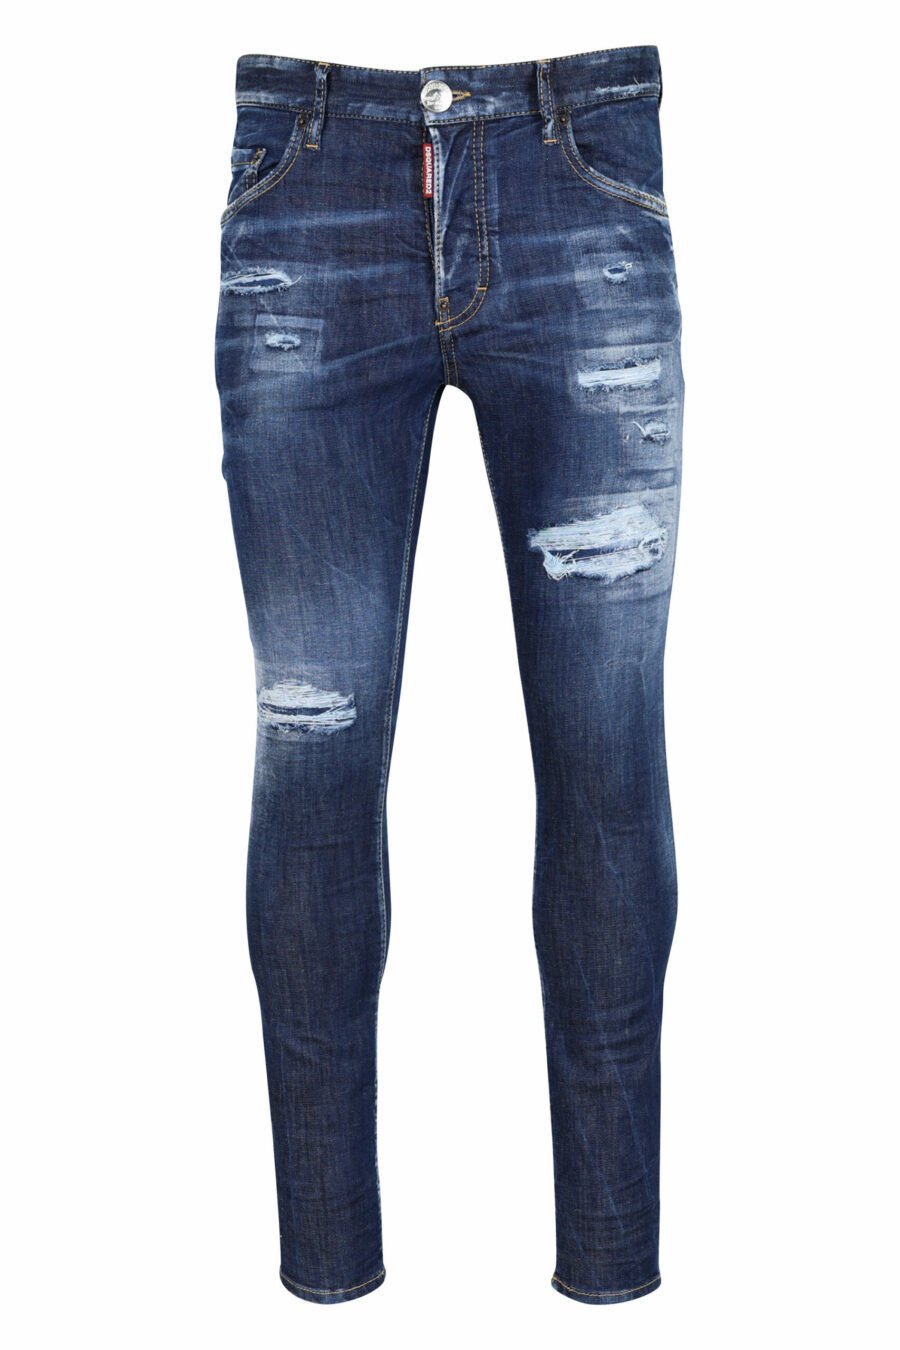 Blue "super twinky jean" jeans with rips and frayed - 8054148106201 scaled